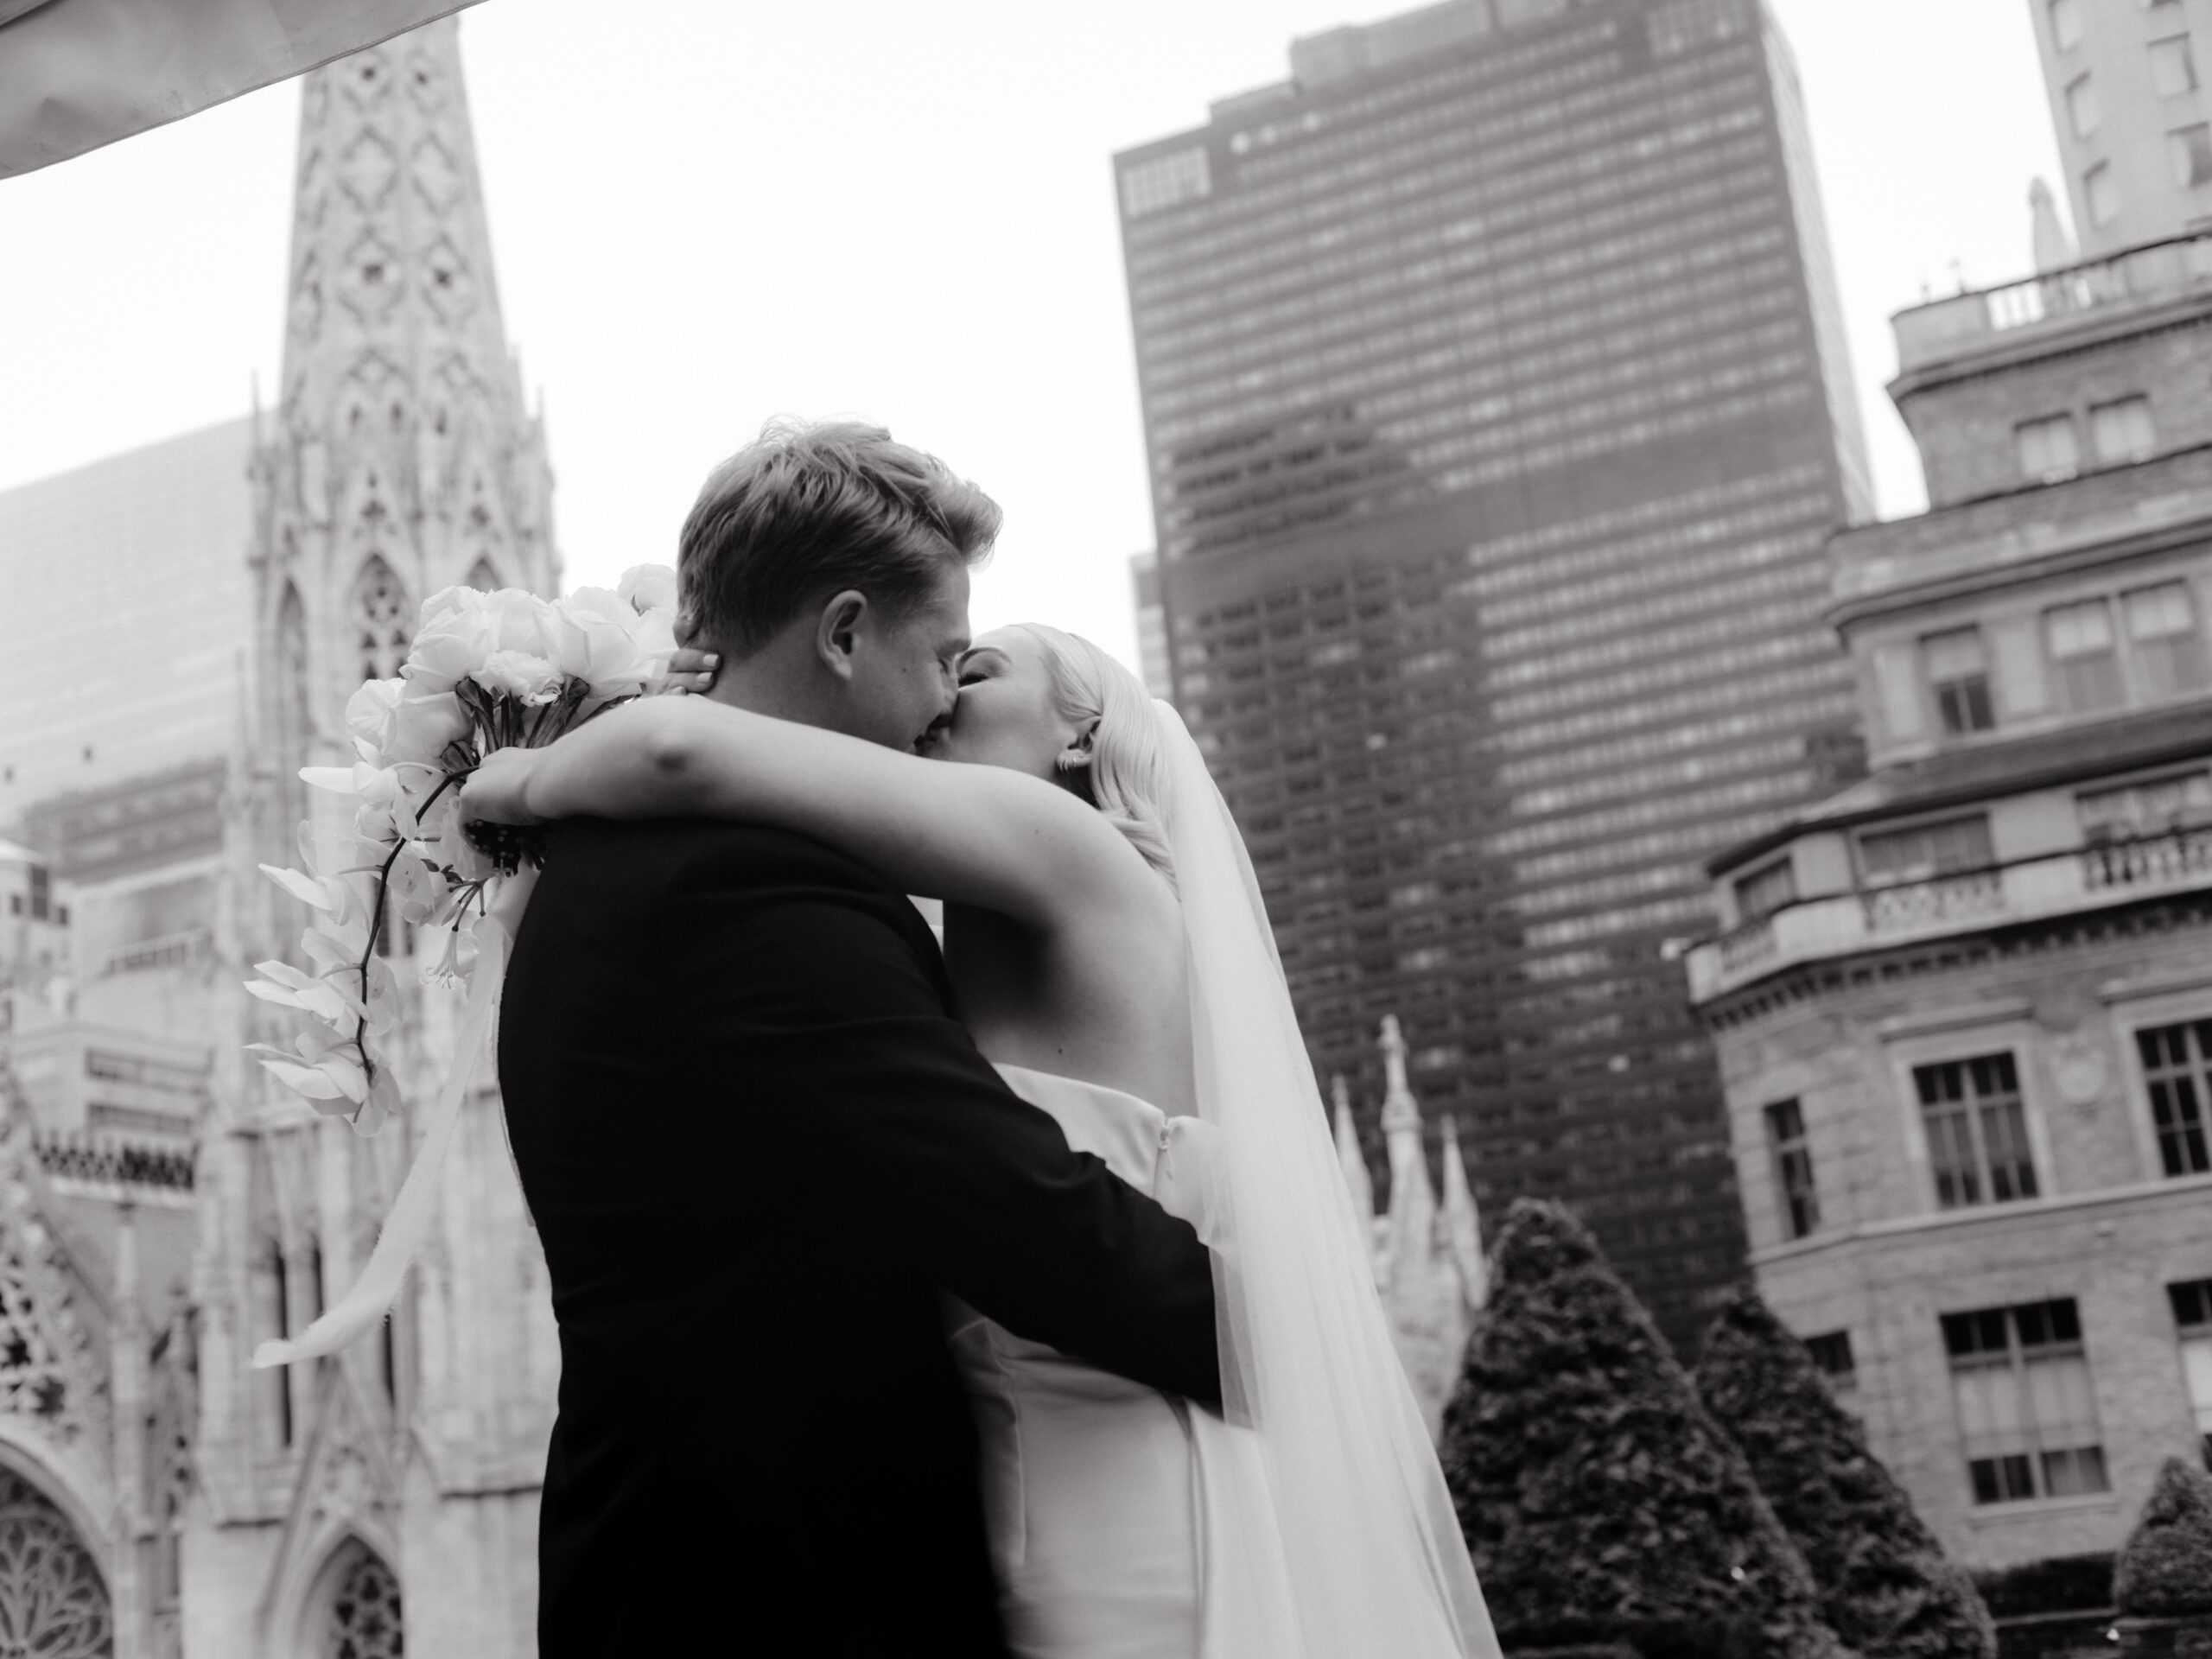 The newlyweds are kissing each other after the wedding ceremony at 620 Loft and Garden, overlooking St. Patrick's Cathedral. Image by Jenny Fu Studio